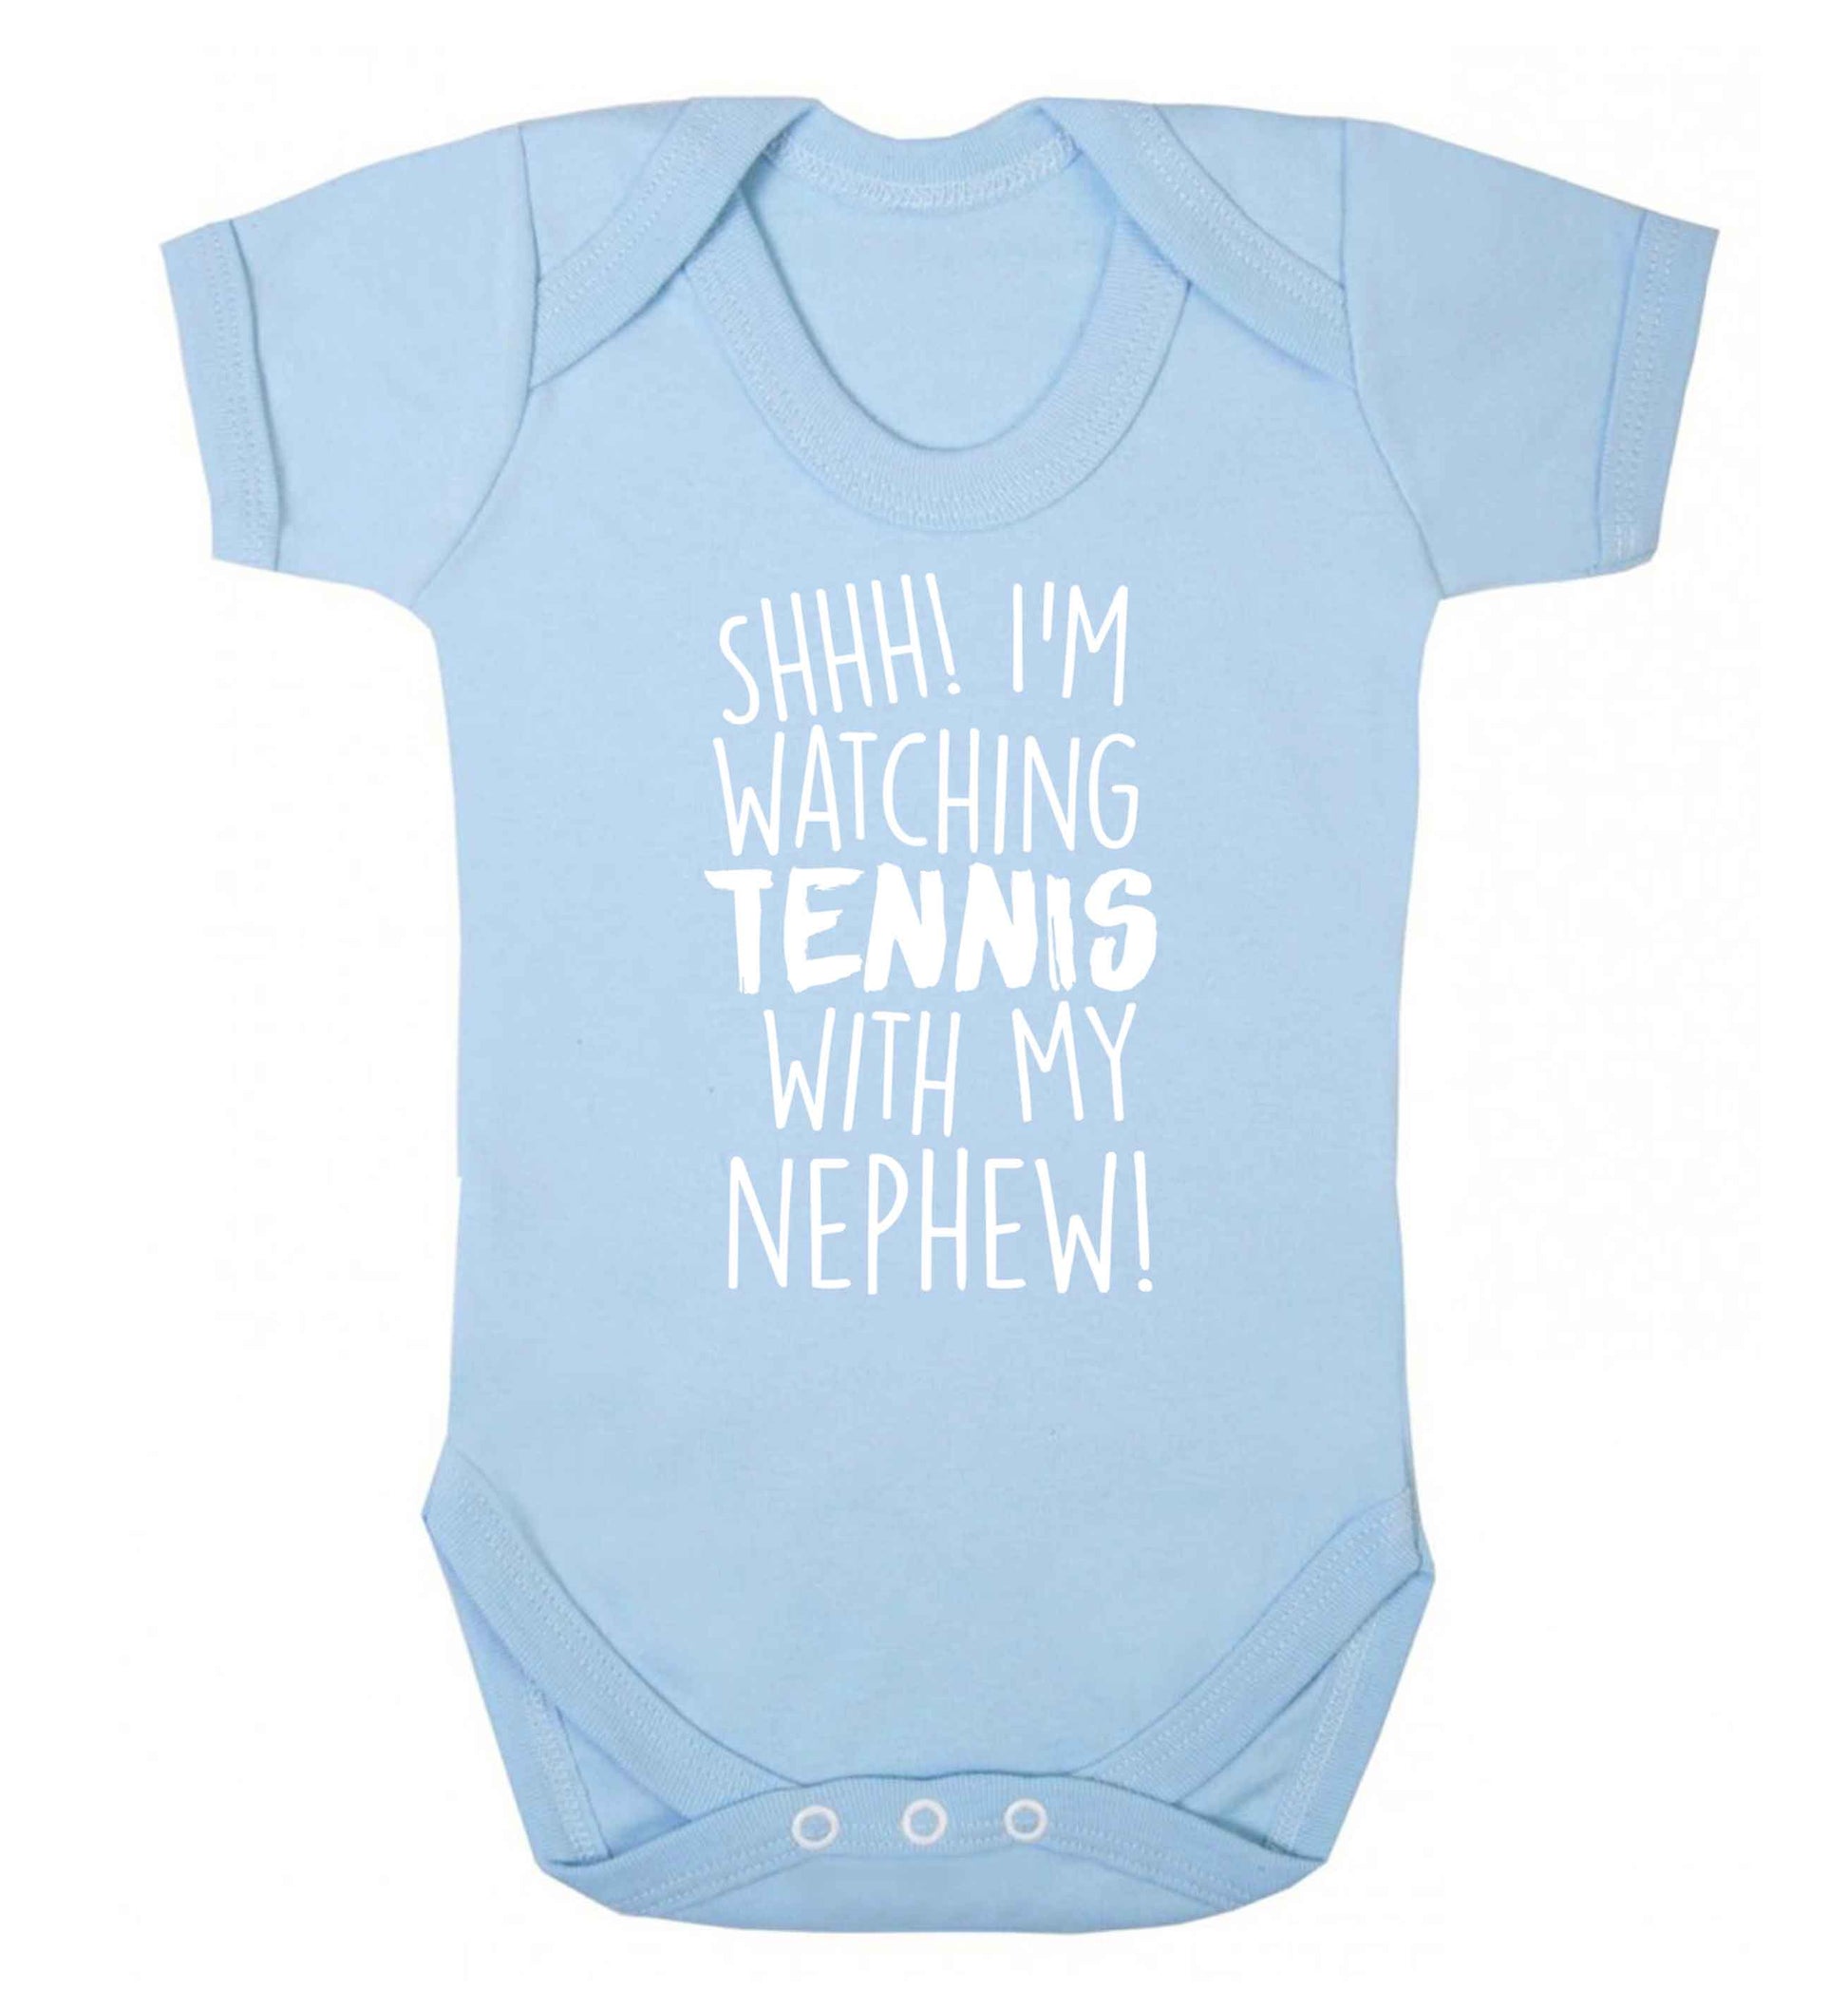 Shh! I'm watching tennis with my nephew! Baby Vest pale blue 18-24 months